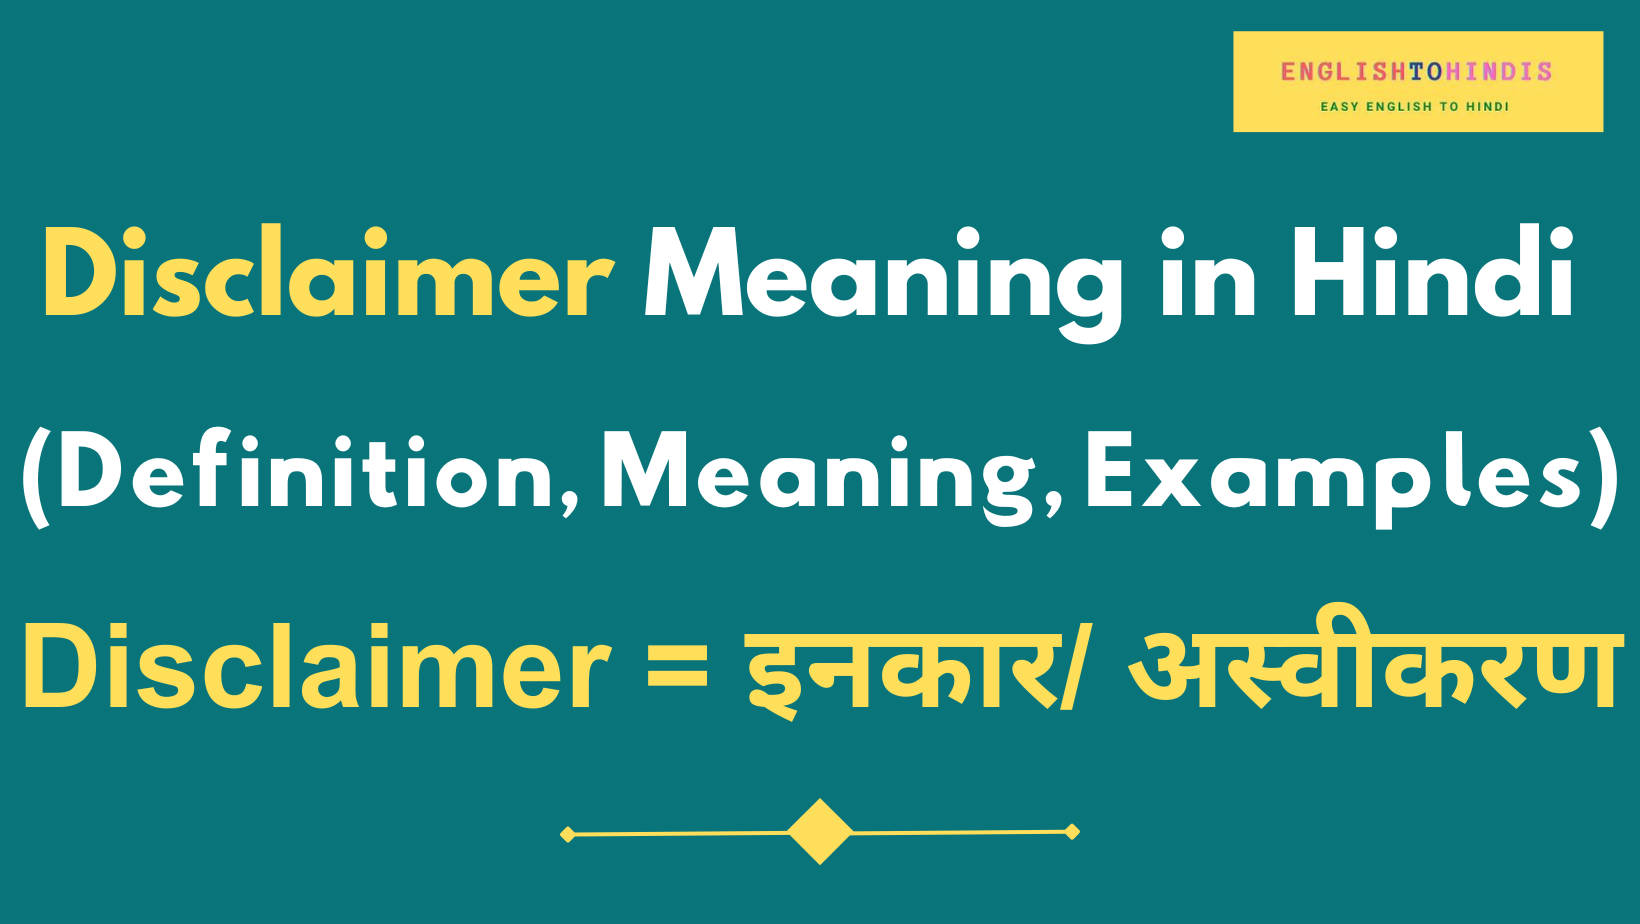 Disclaimer Meaning in Hindi